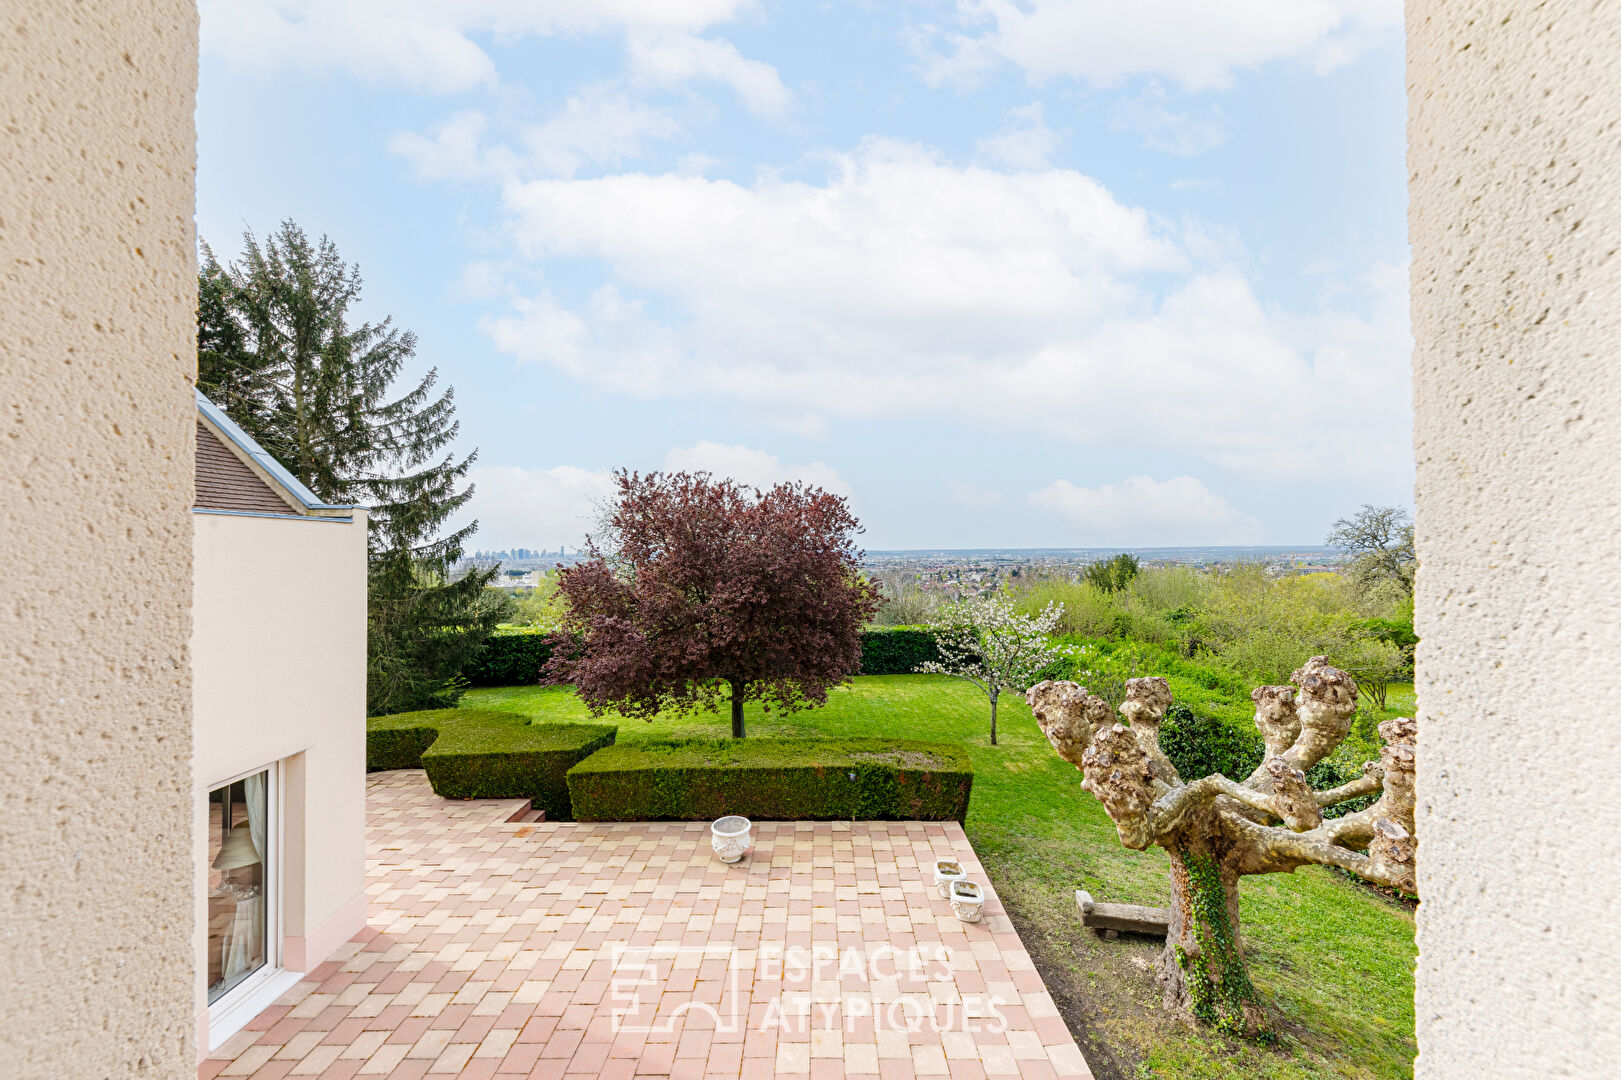 Architect-designed house nestled on the heights of Cormeilles-en-Parisis.